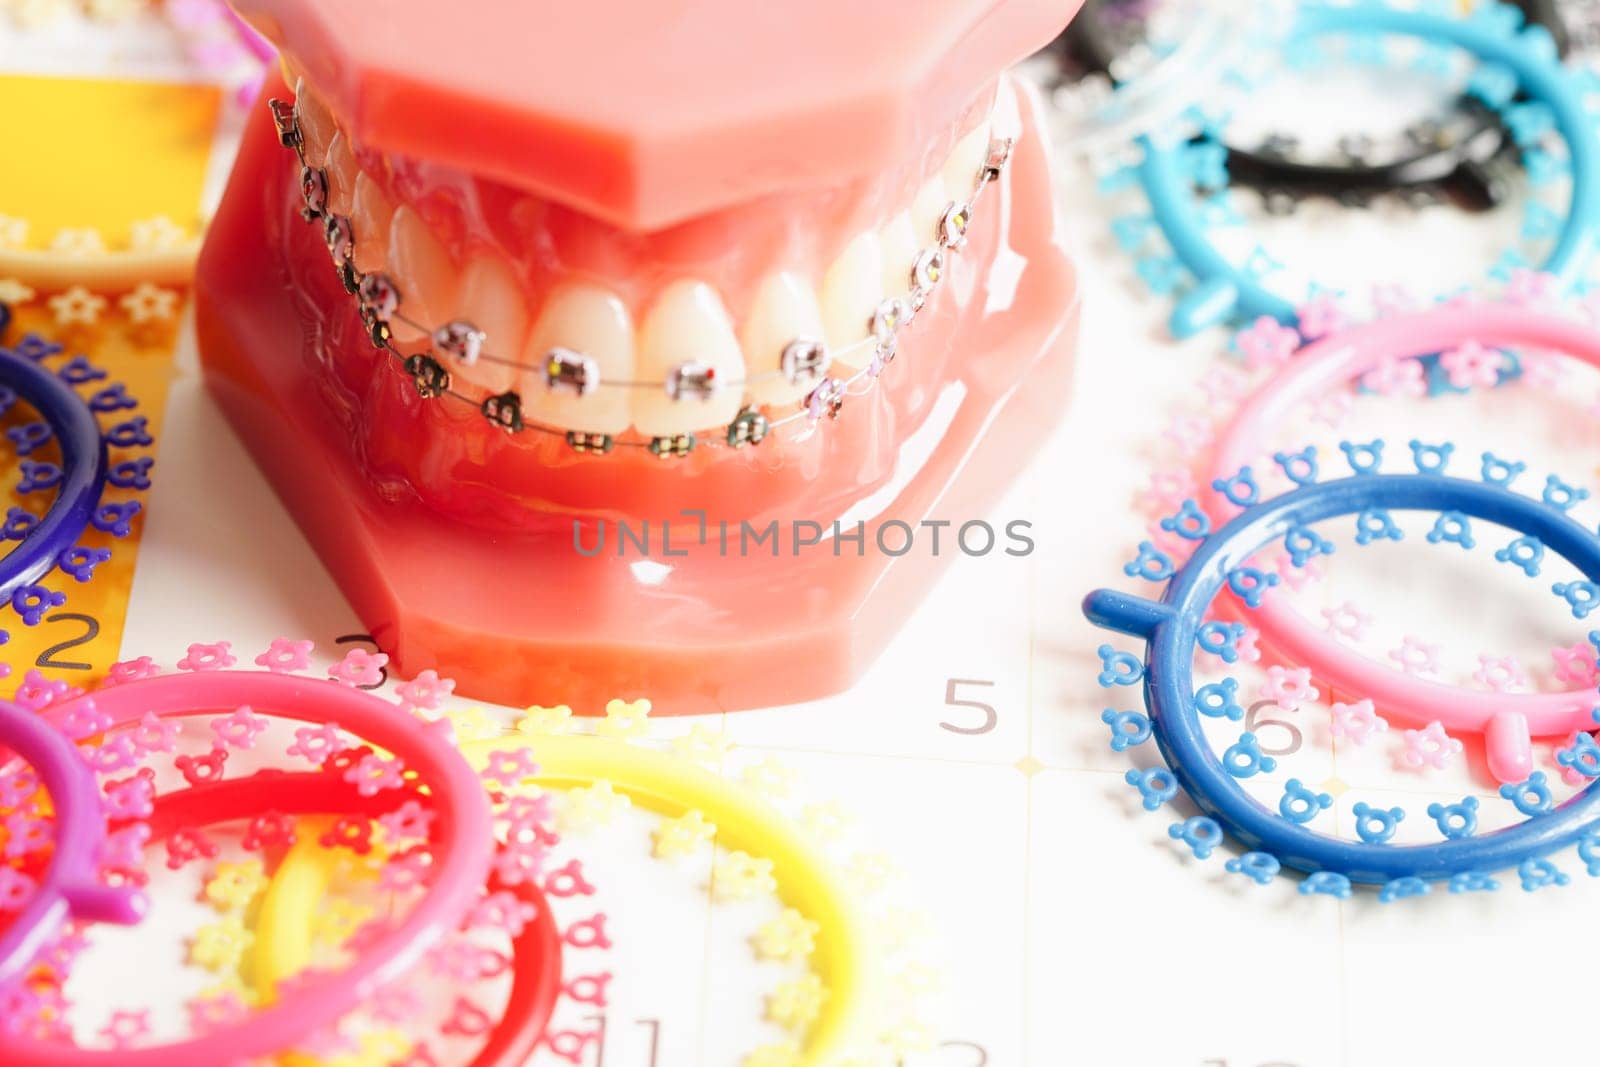 Orthodontic ligatures rings and ties, elastic rubber bands on orthodontic braces, model for dentist studying about dentistry. by sweettomato